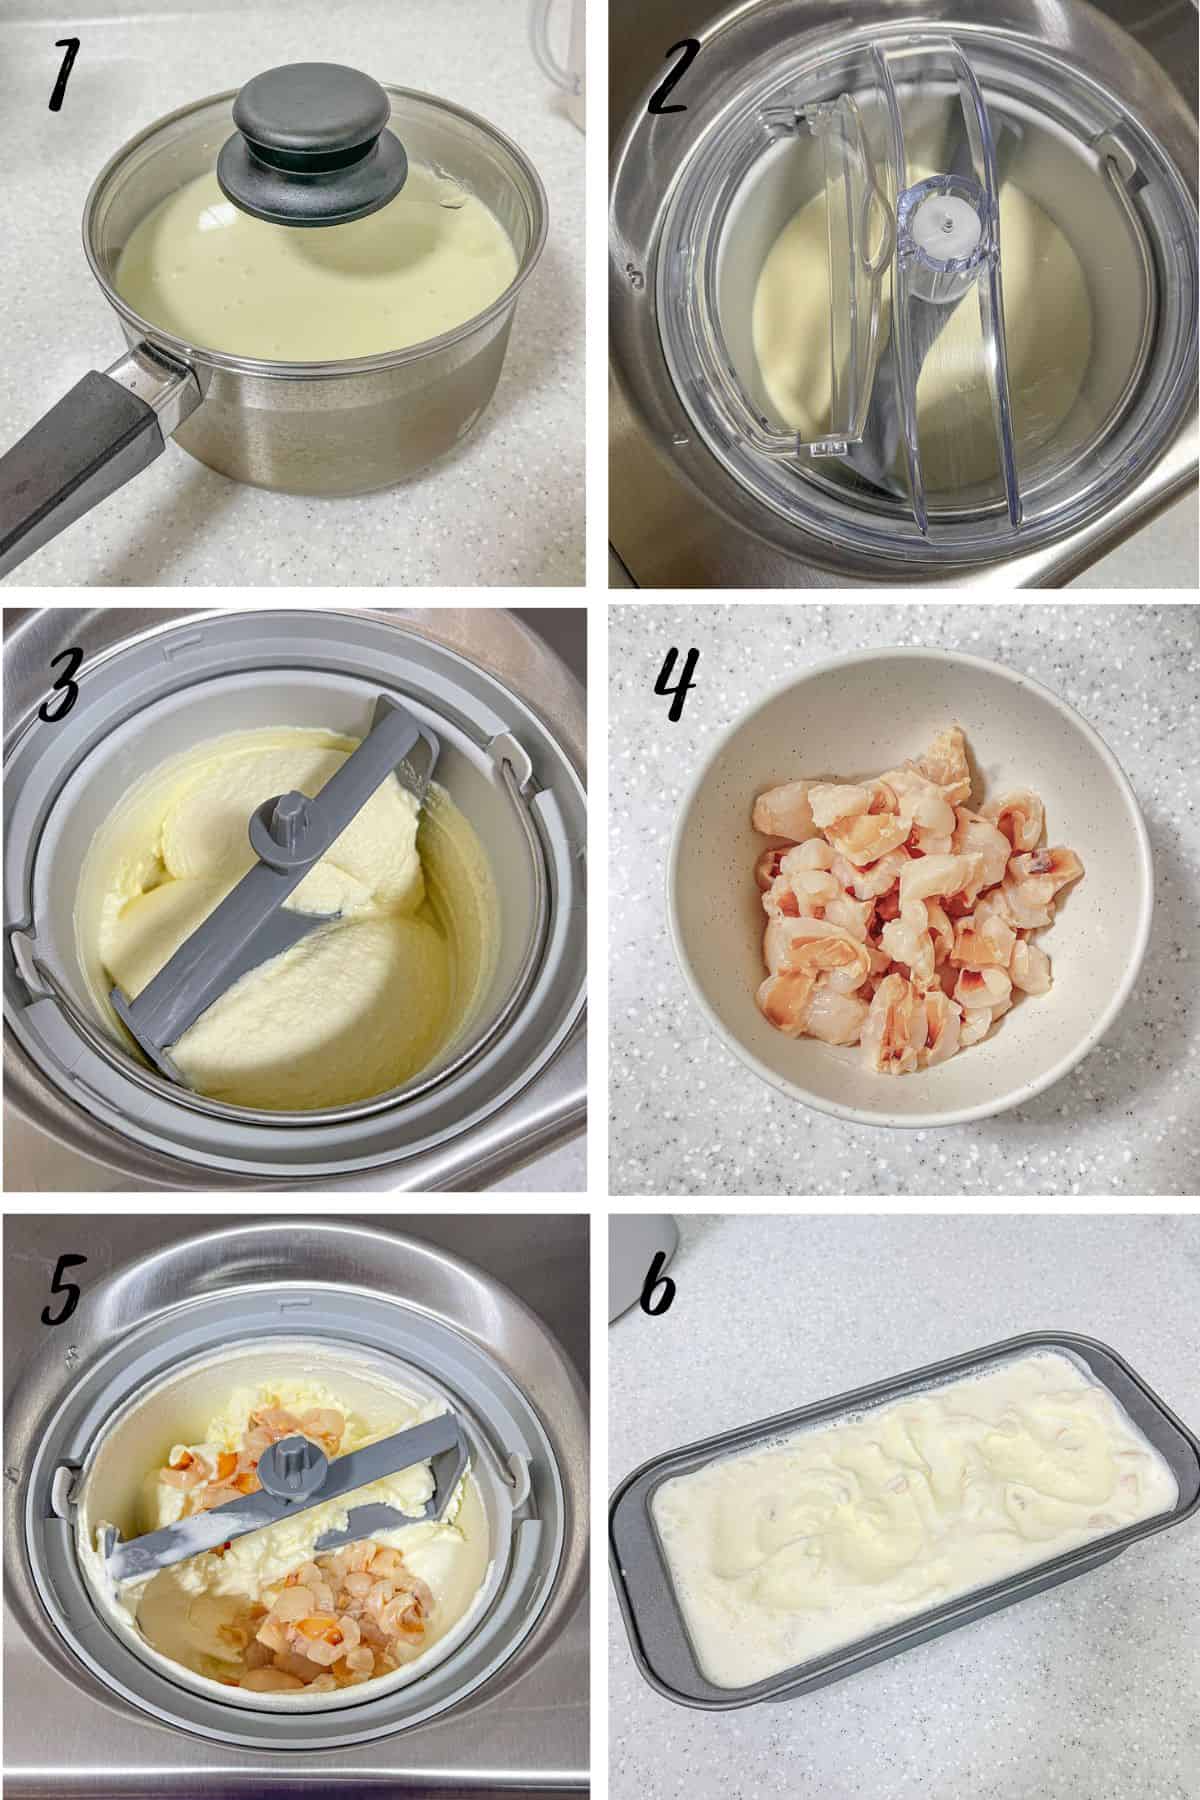 A poster of 6 images showing how to churn lychee ice cream.